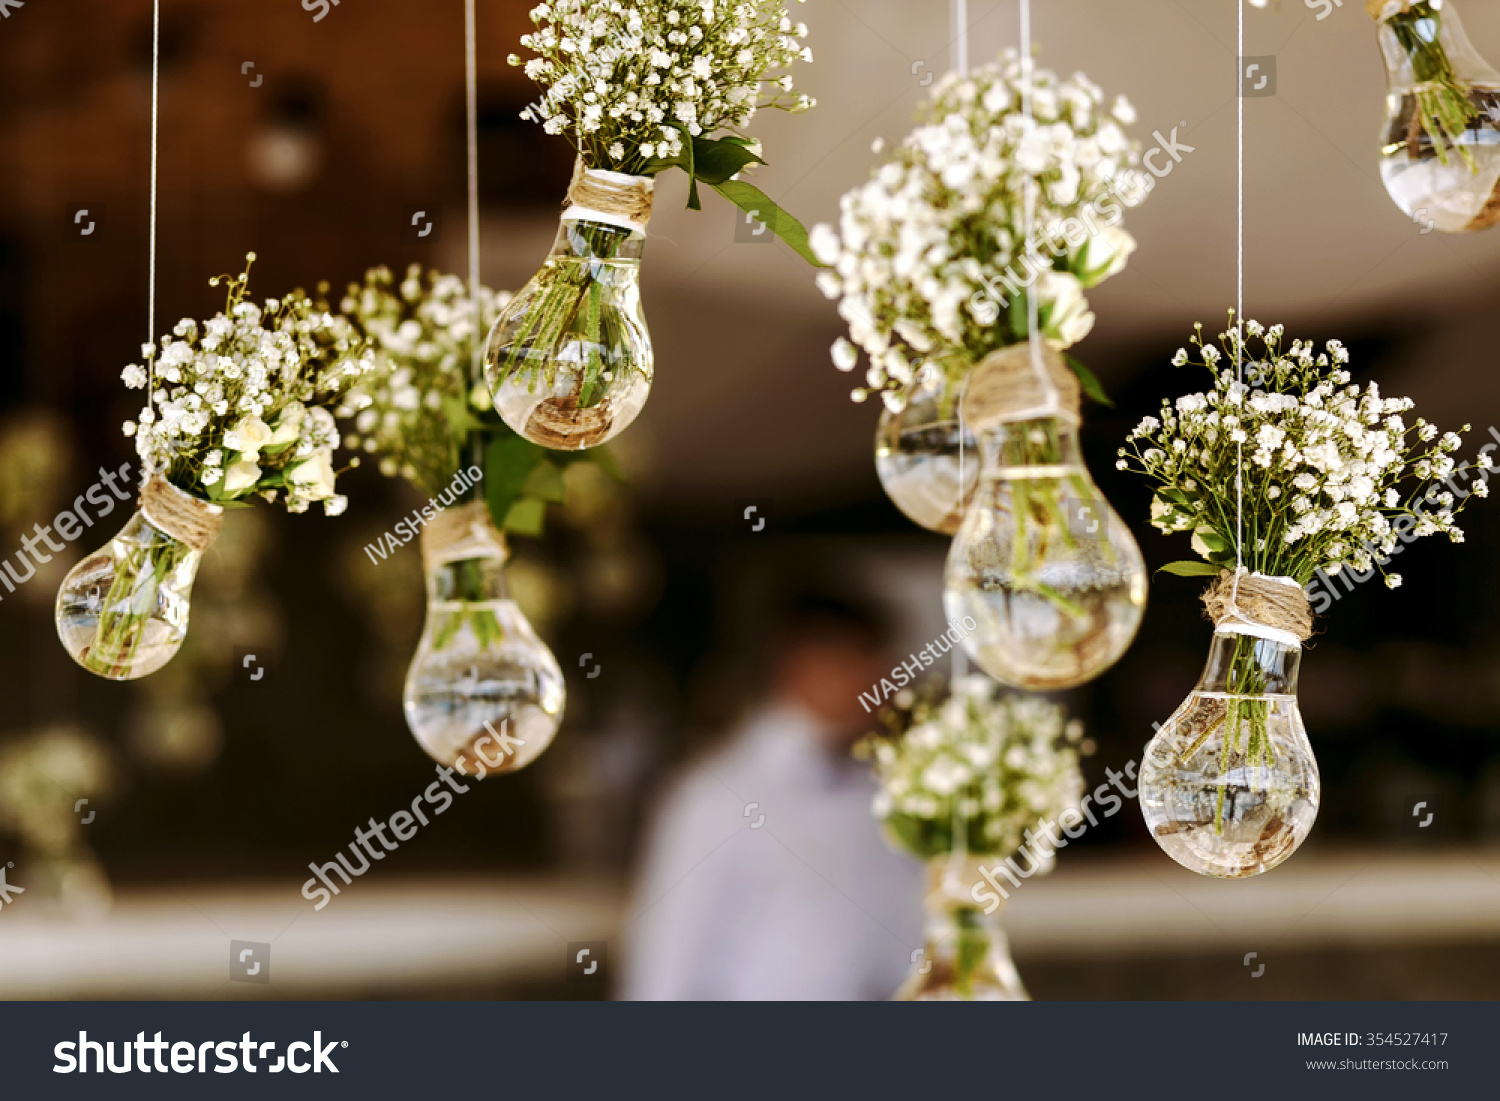 Original wedding floral decoration in the form of mini-vases and bouquets of flowers hanging from the ceiling #354527417